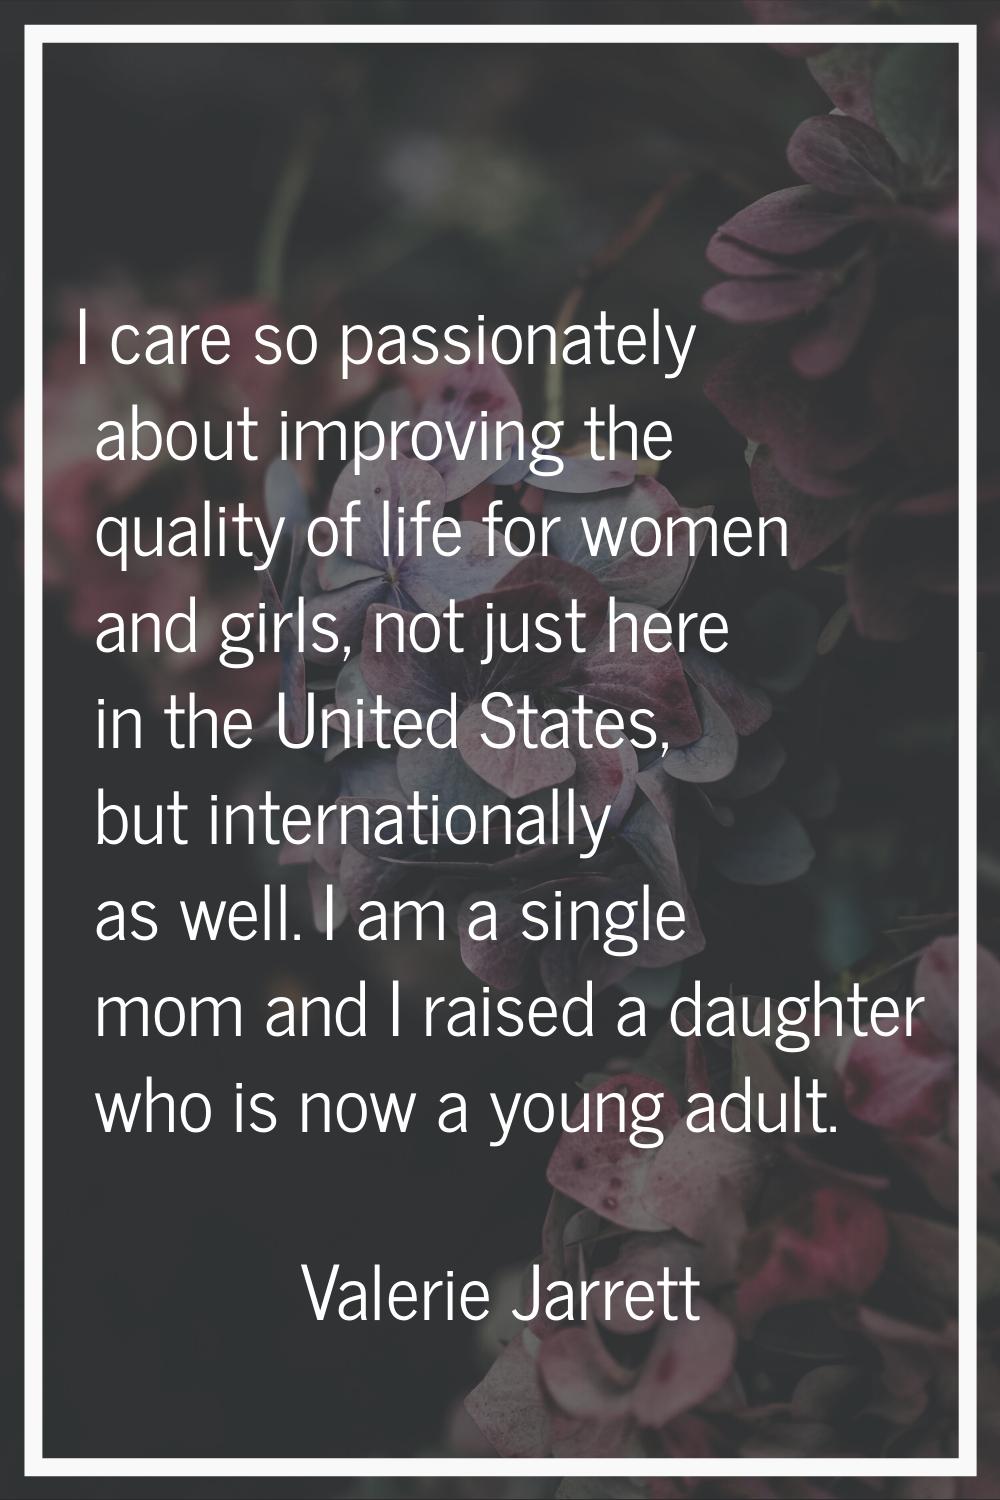 I care so passionately about improving the quality of life for women and girls, not just here in th